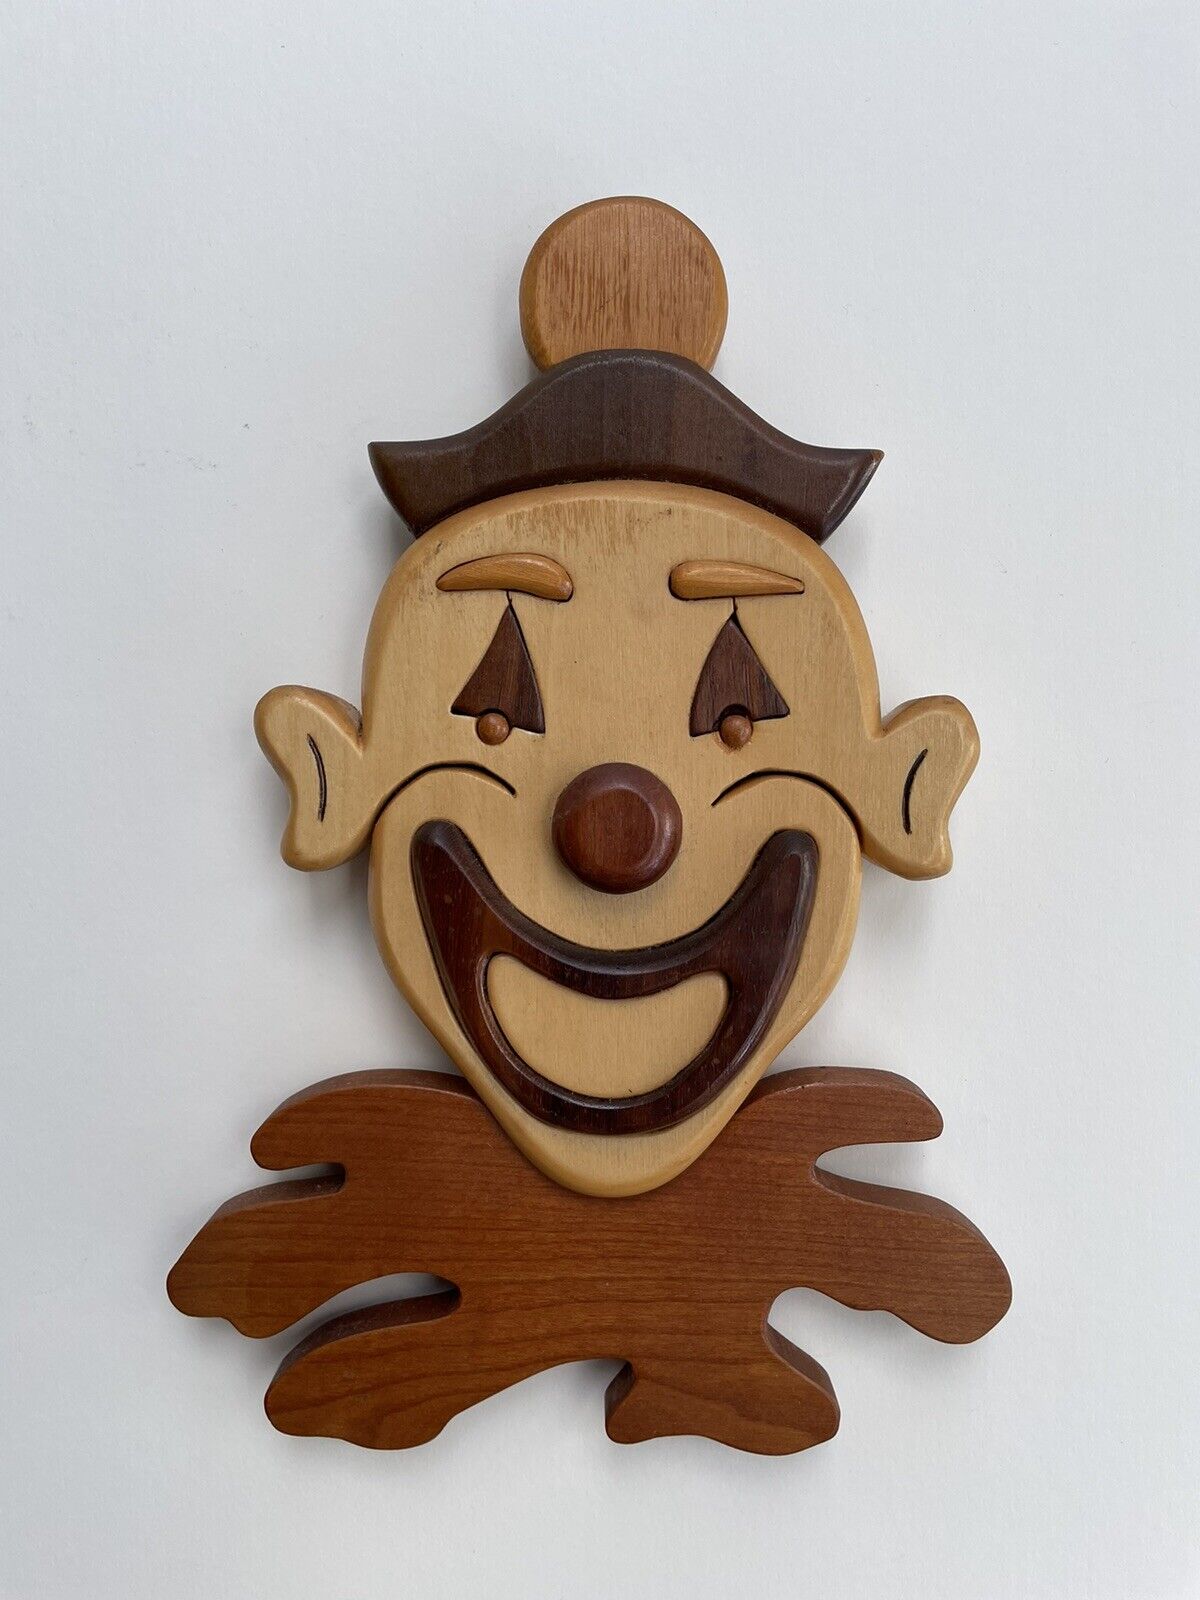 Vtg Handcrafted Intarsia 3D Wood Clown Inlay Marquetry Plaque by Al Wubker